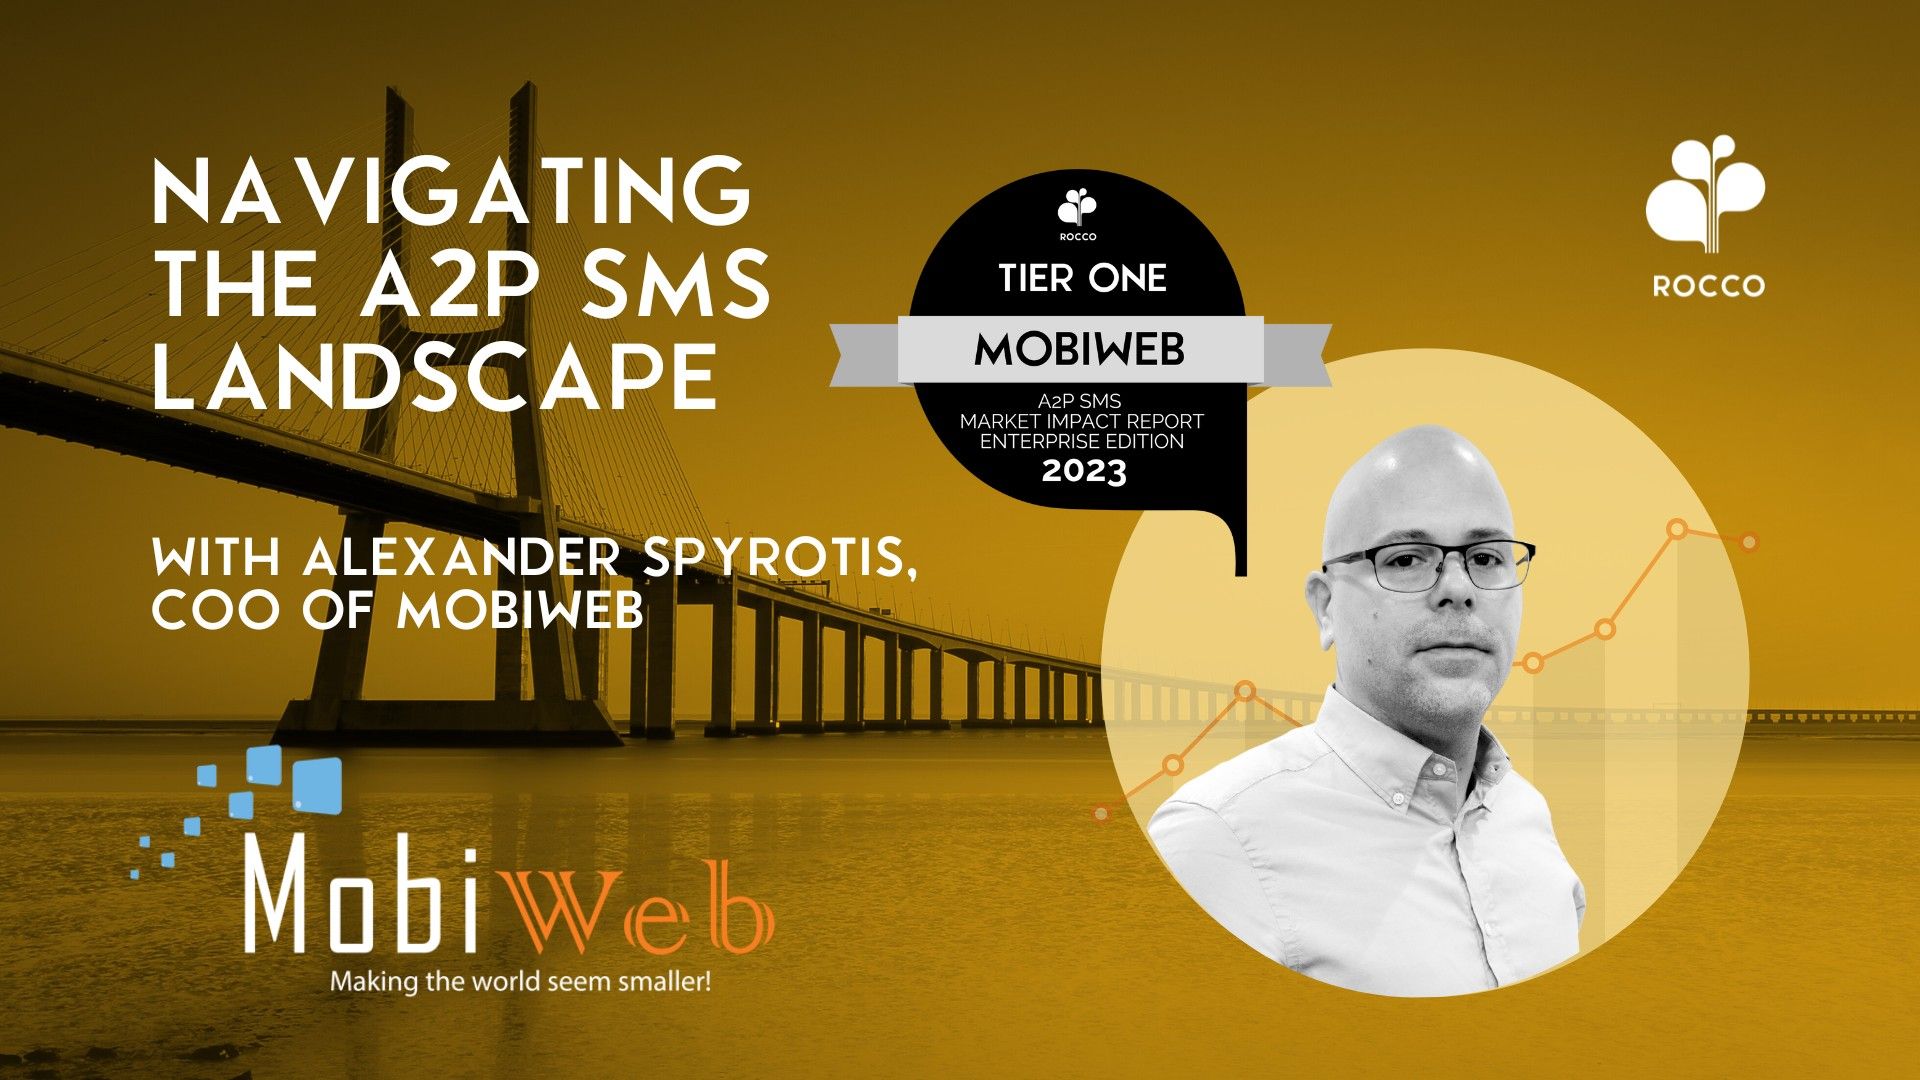 Interview with Alexander Spyrotis from MobiWeb